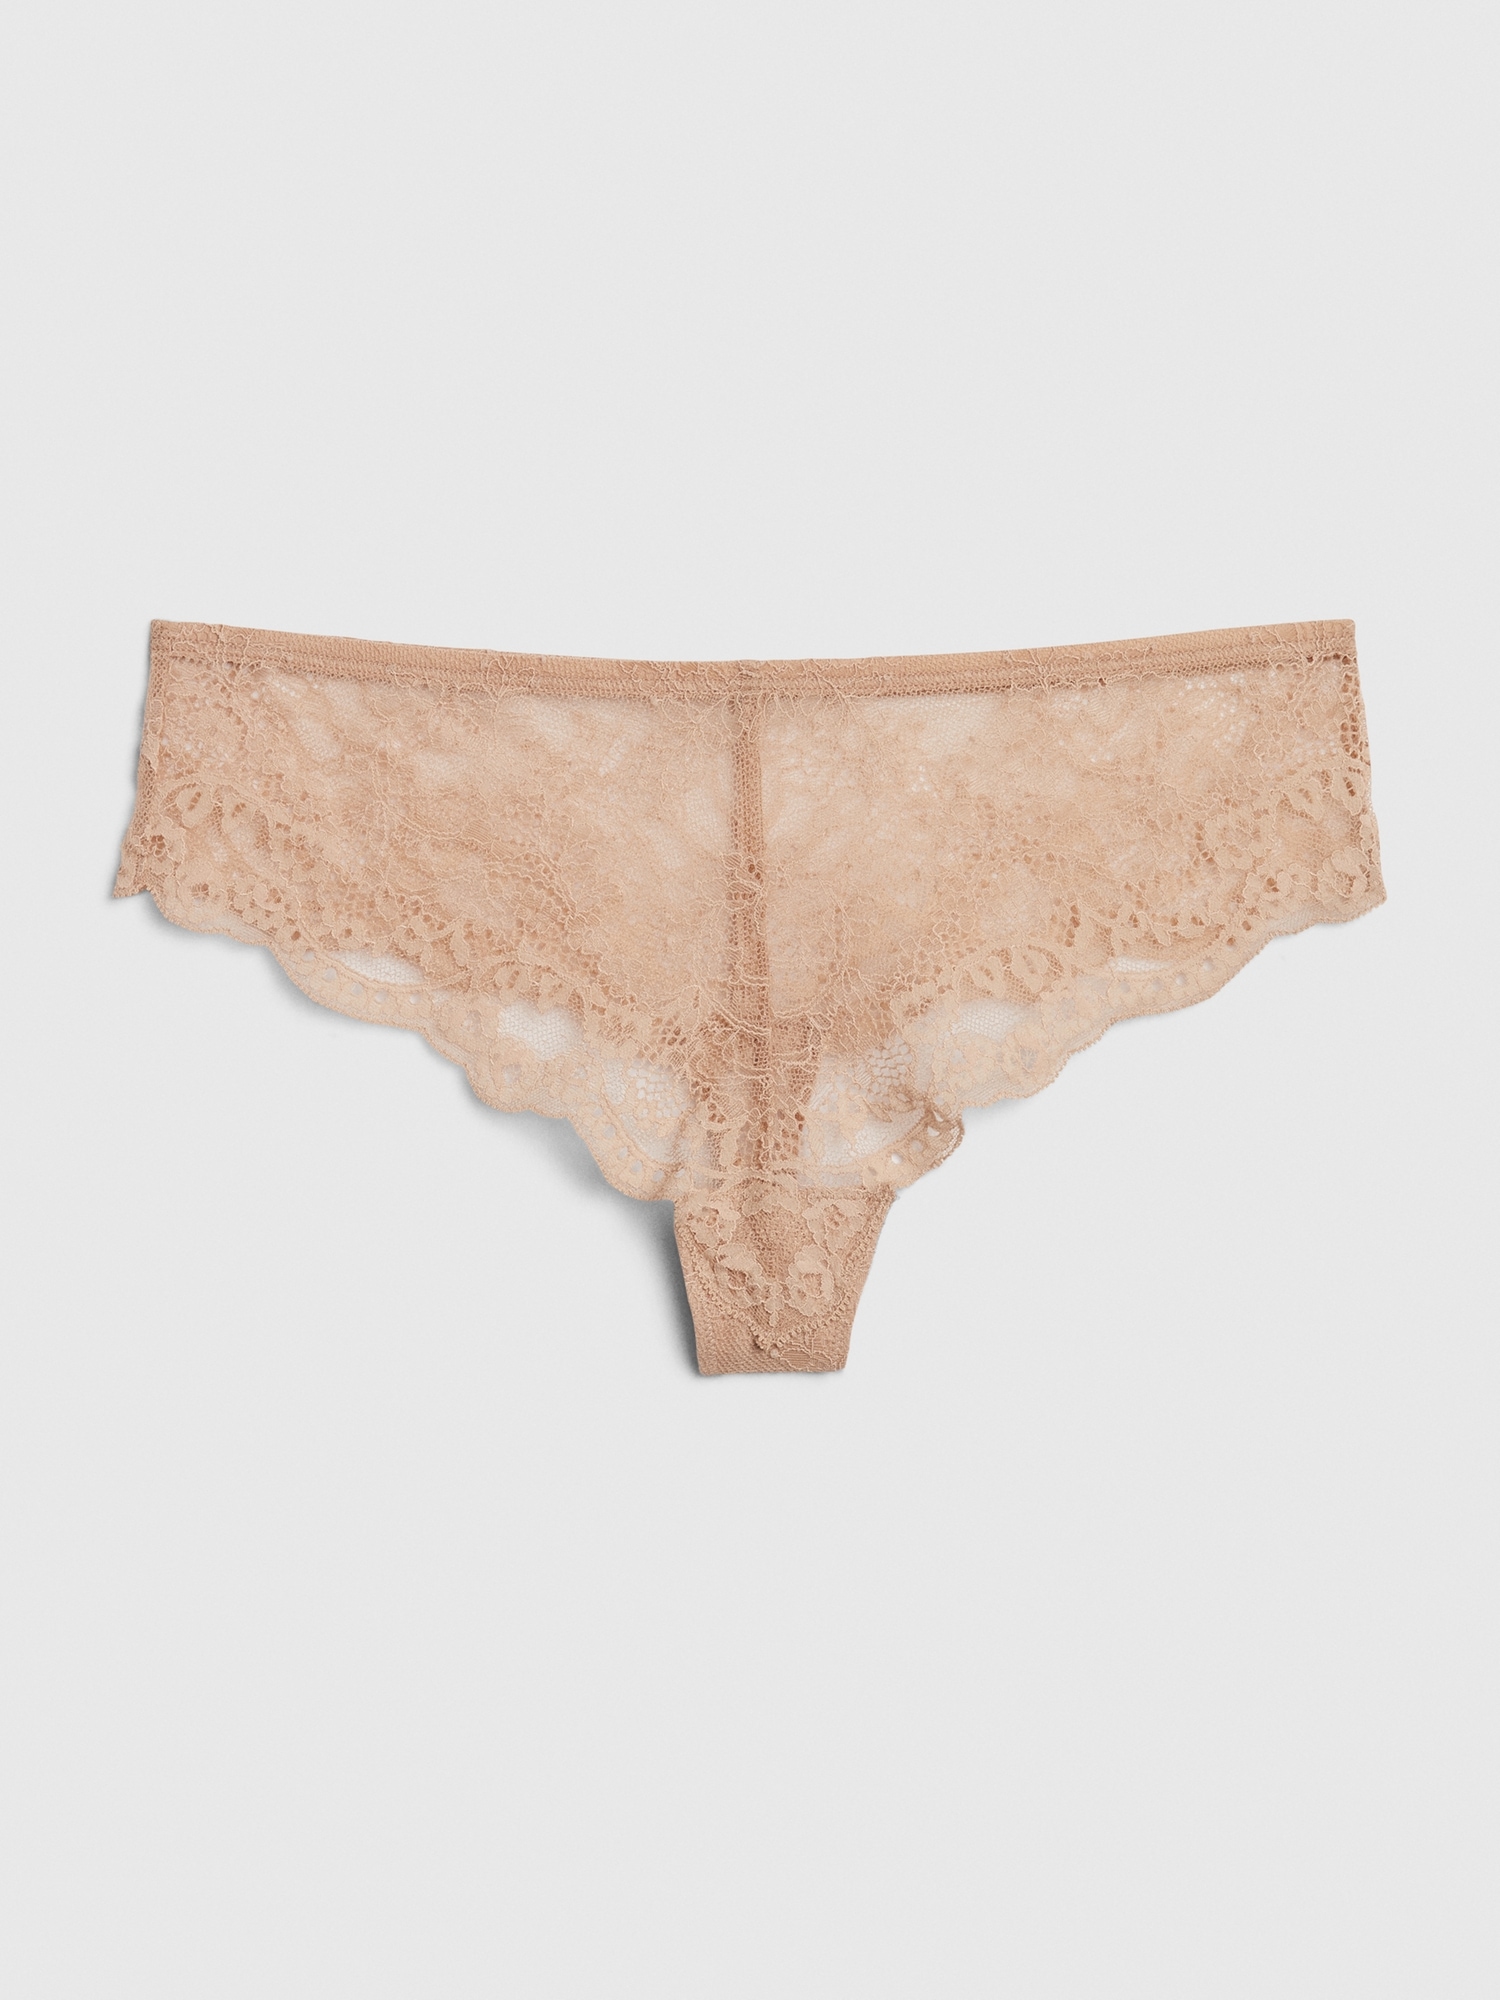 Handmade Thongs in White Color With Lace, Lace Has White and White Flowers.  -  Canada